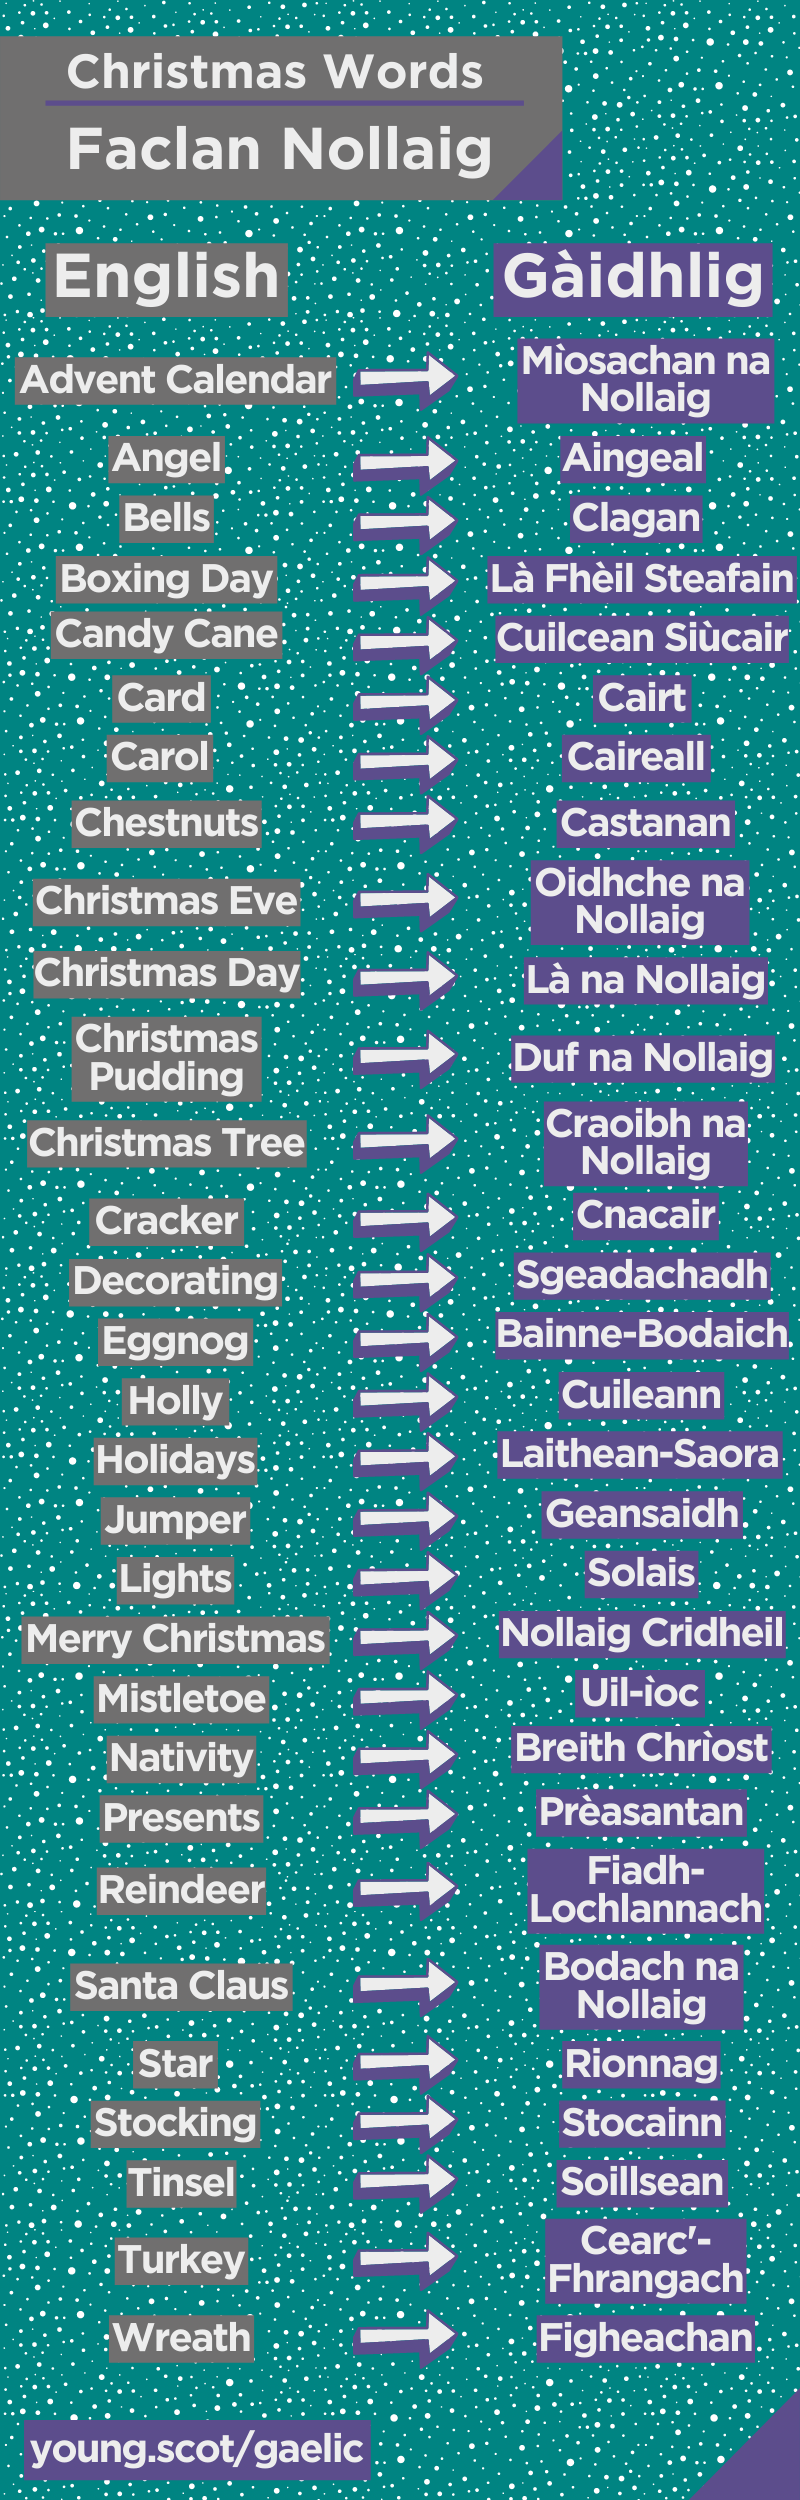 Gaelic Christmas words infographic with English on the left and Gaelic translations on the right. There is a text version below.